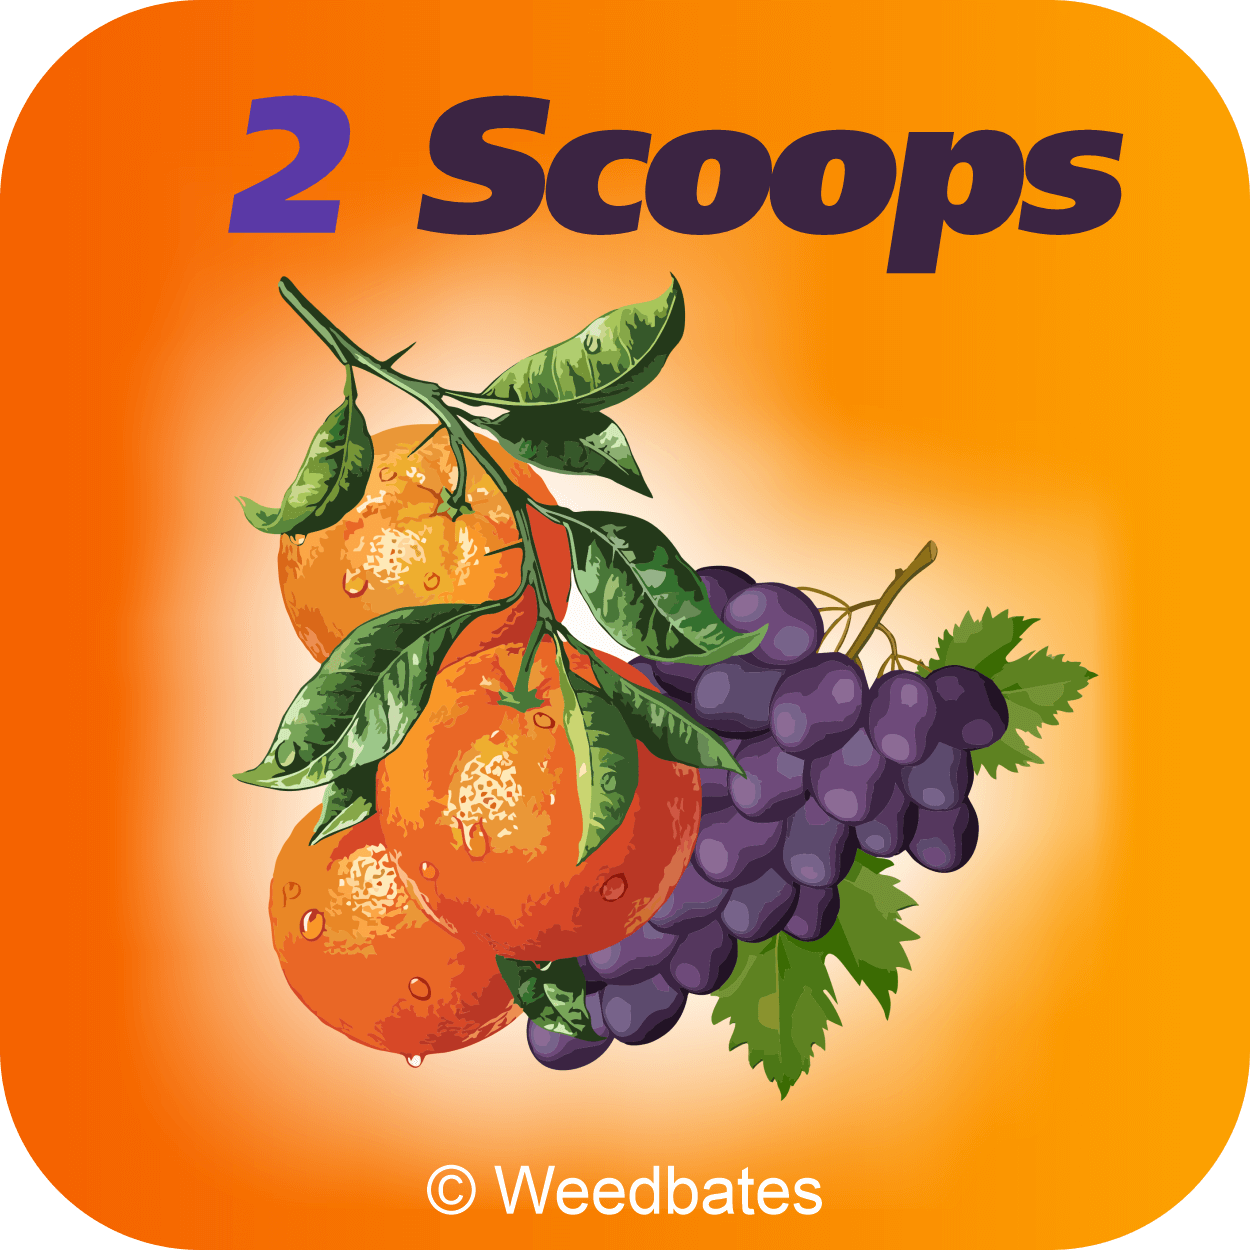 Growing 2 Scoops Cannabis